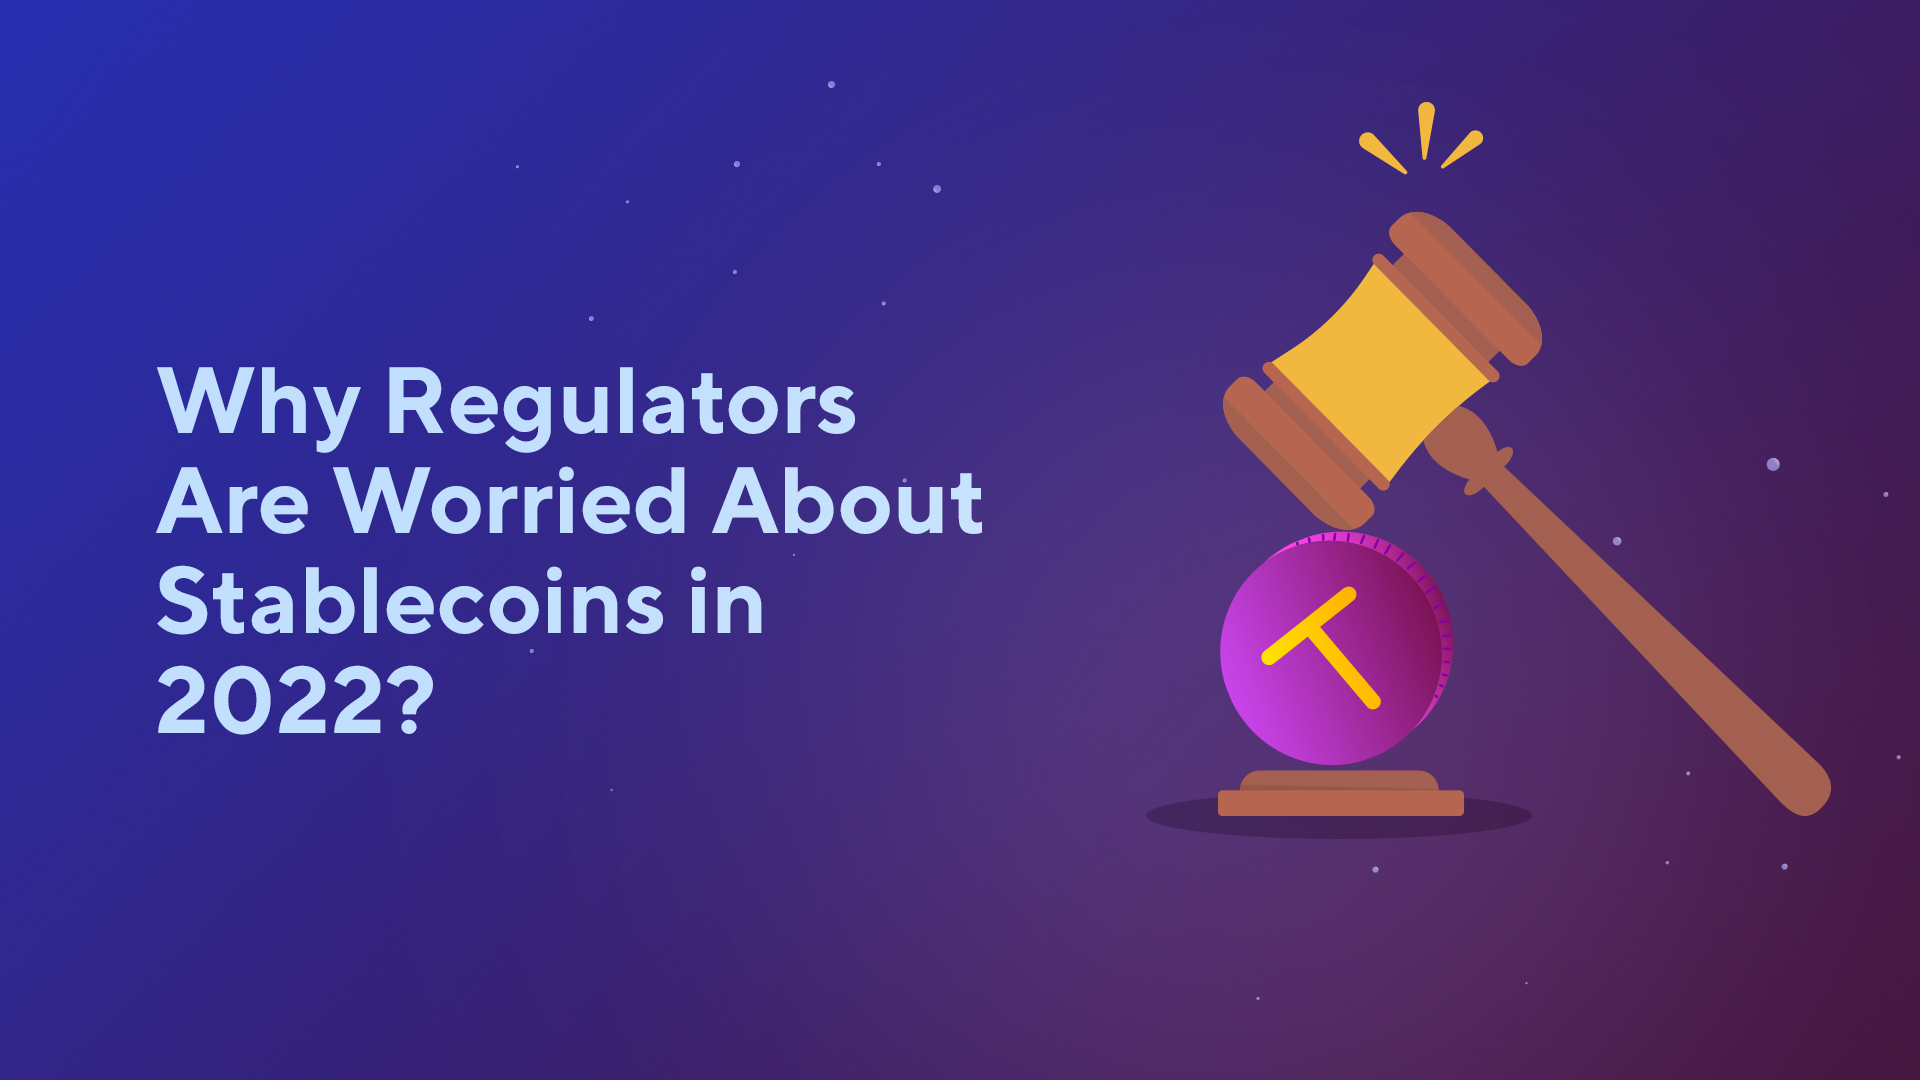 Why Regulators Are Worried About Stablecoins in 2022?